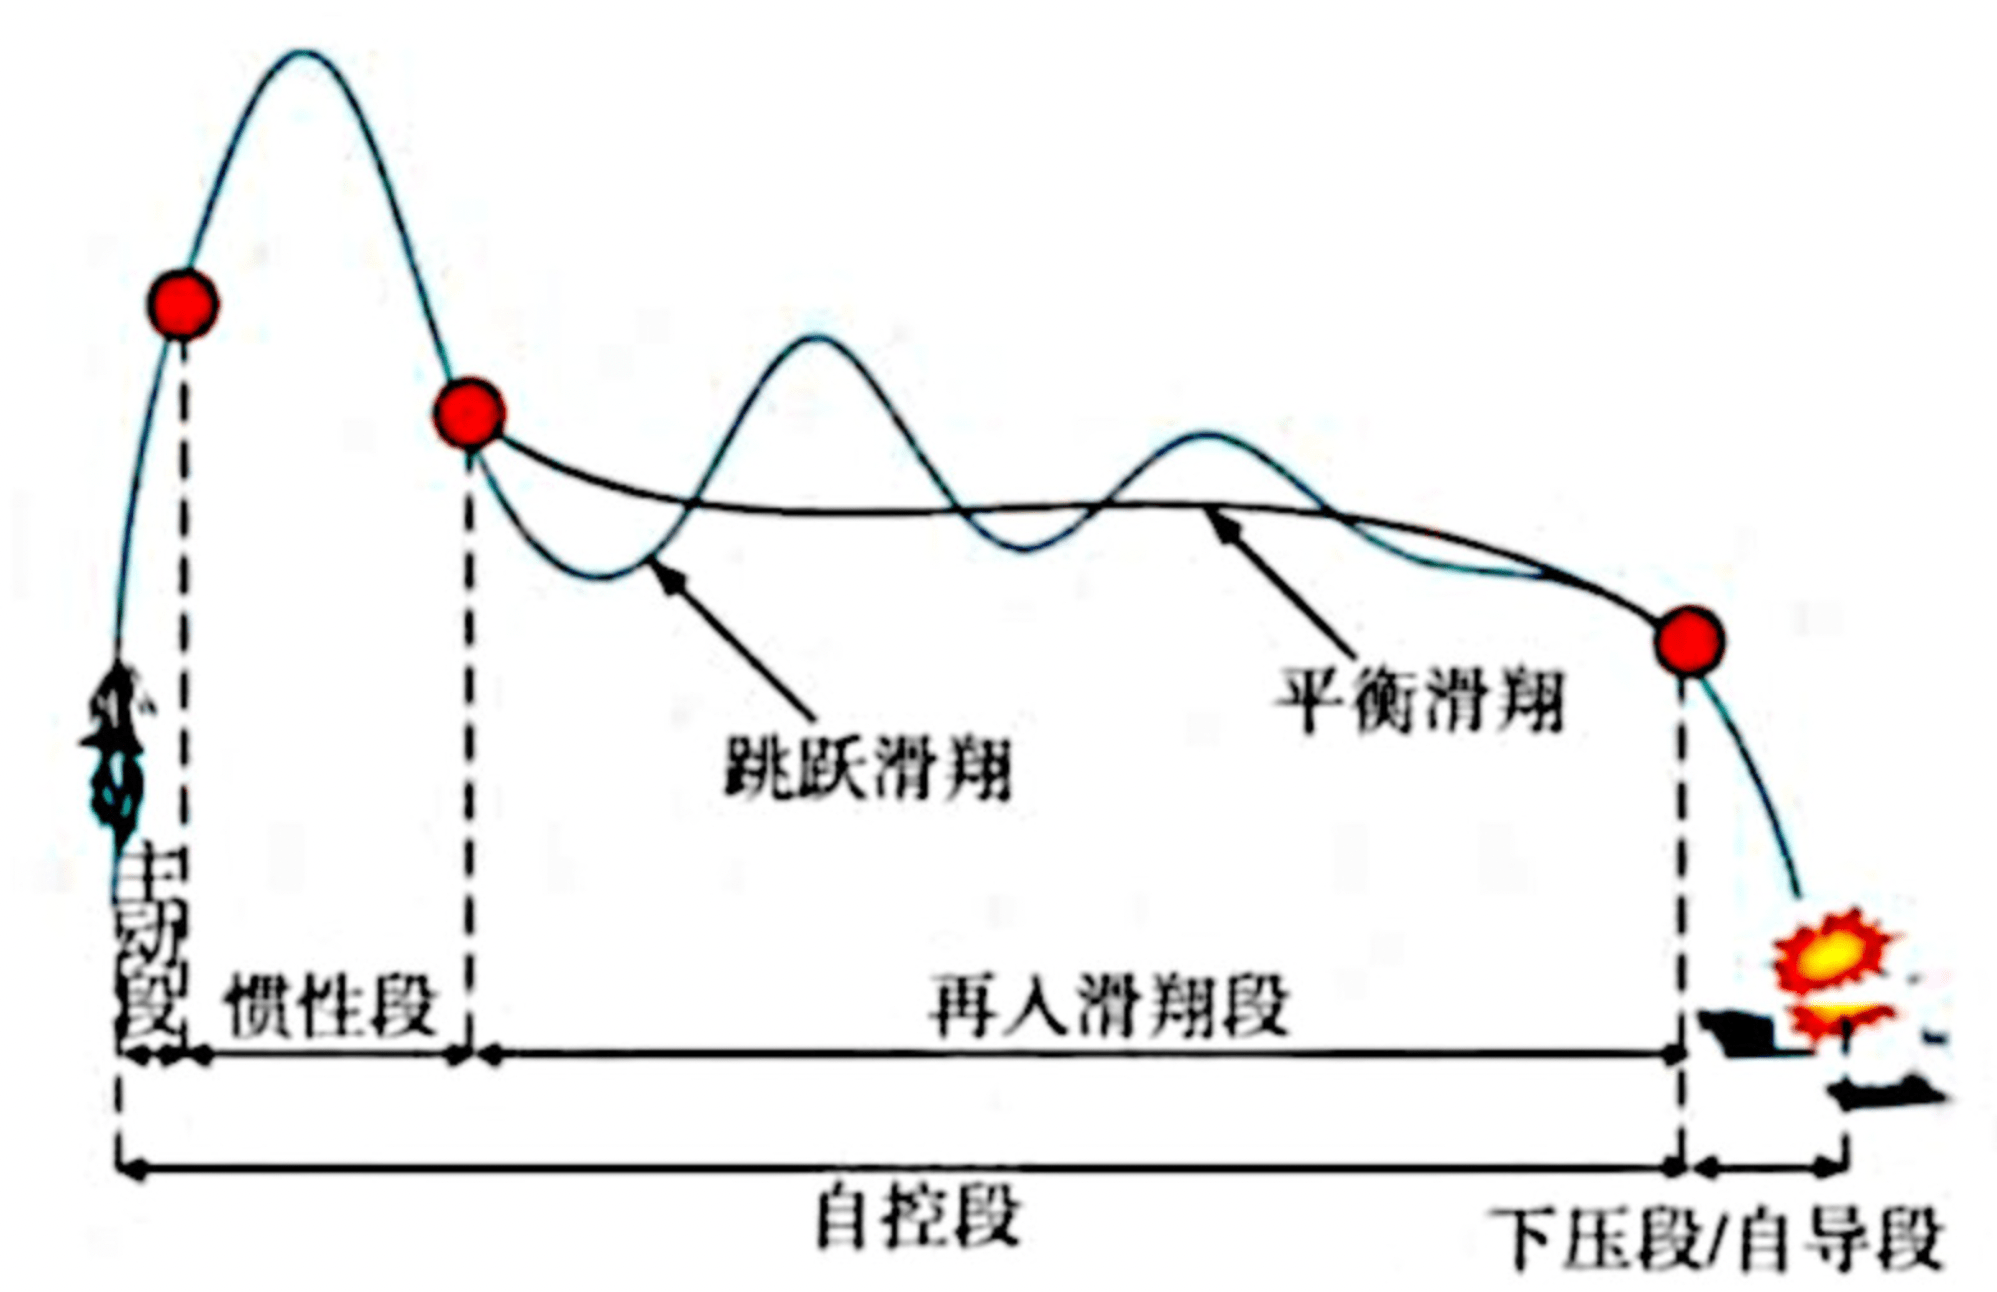 A Chinese graphic showing a ballistic missile with the ‘porpoising’ or skip-glide trajectory associated with the CM-401.&nbsp;<em>via Chinese internet</em>